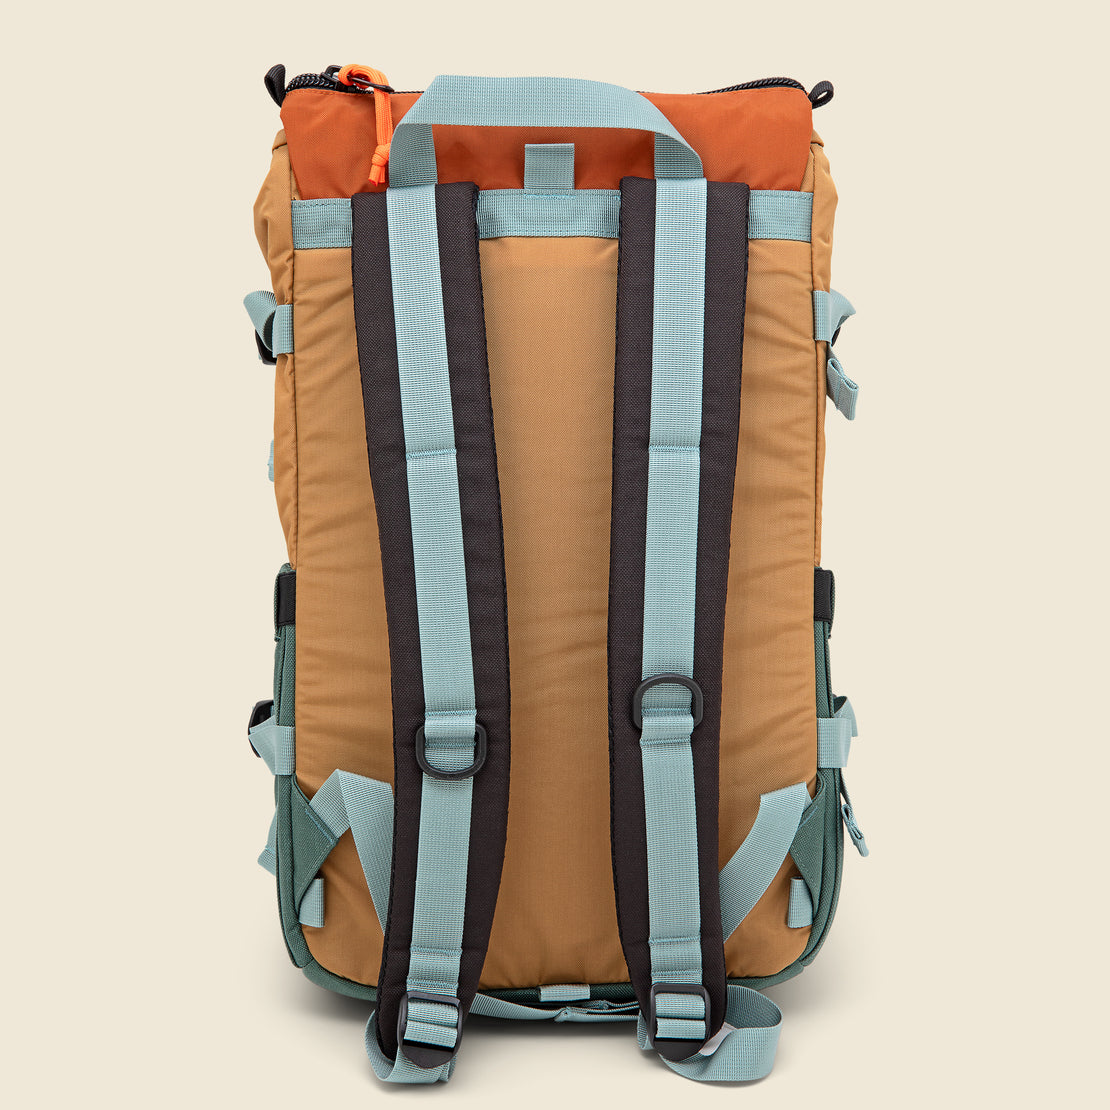 Rover Pack Classic - Forest/Khaki - Topo Designs - STAG Provisions - Accessories - Bags / Luggage